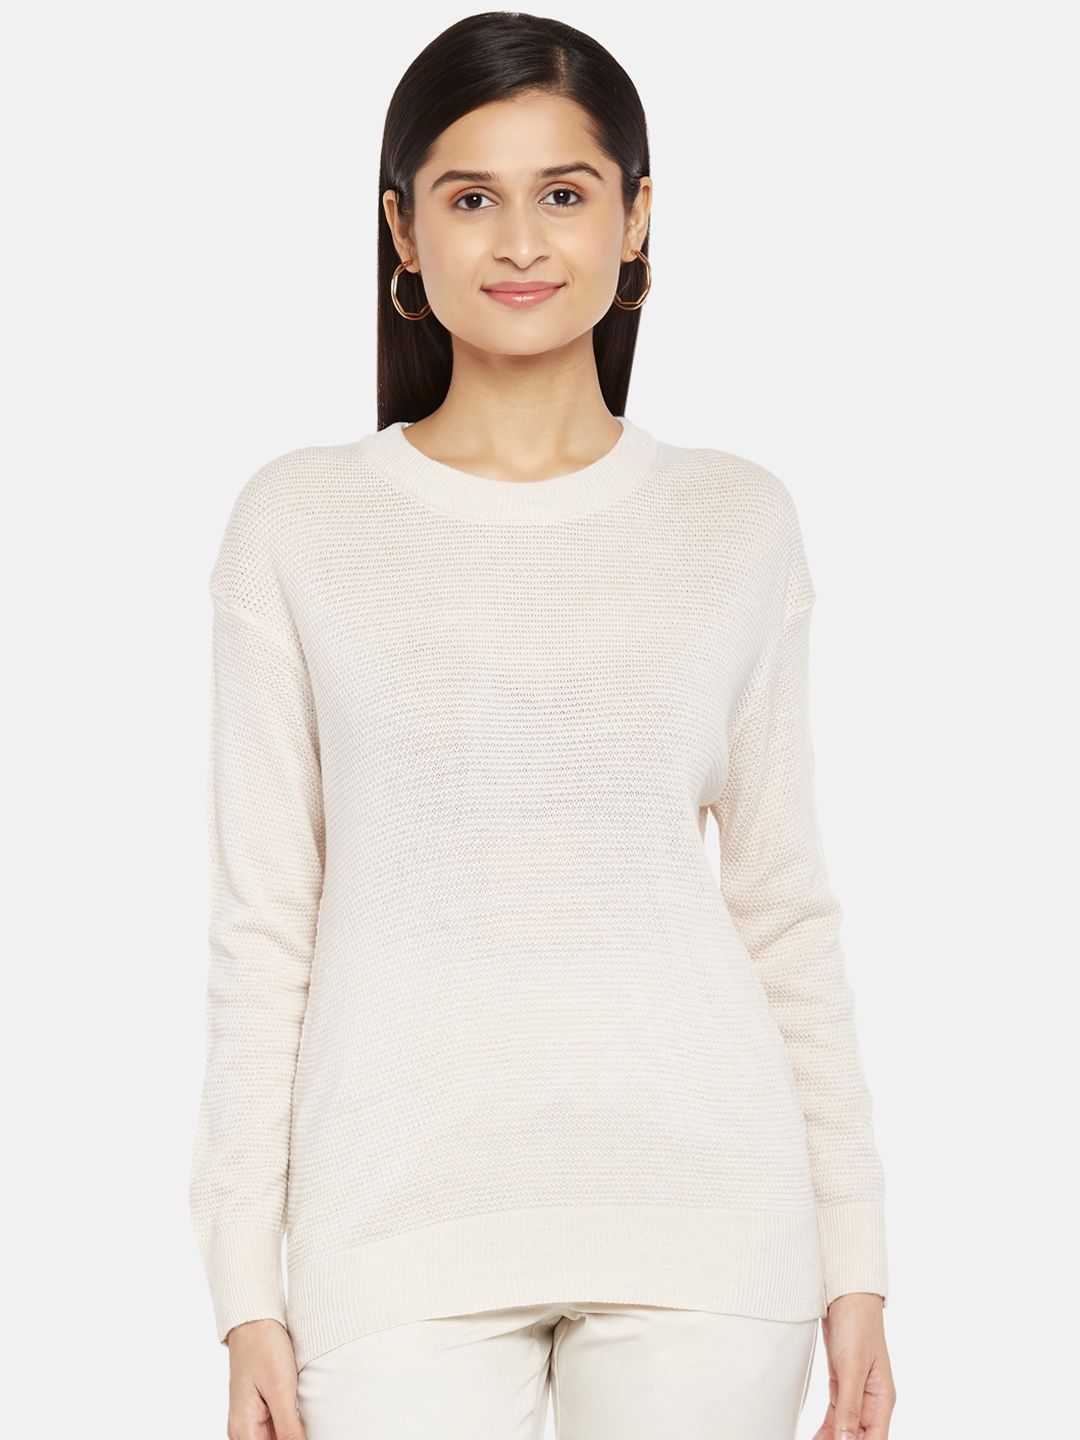 Honey by Pantaloons Women Cream-Coloured Acrylic Pullover Price in India